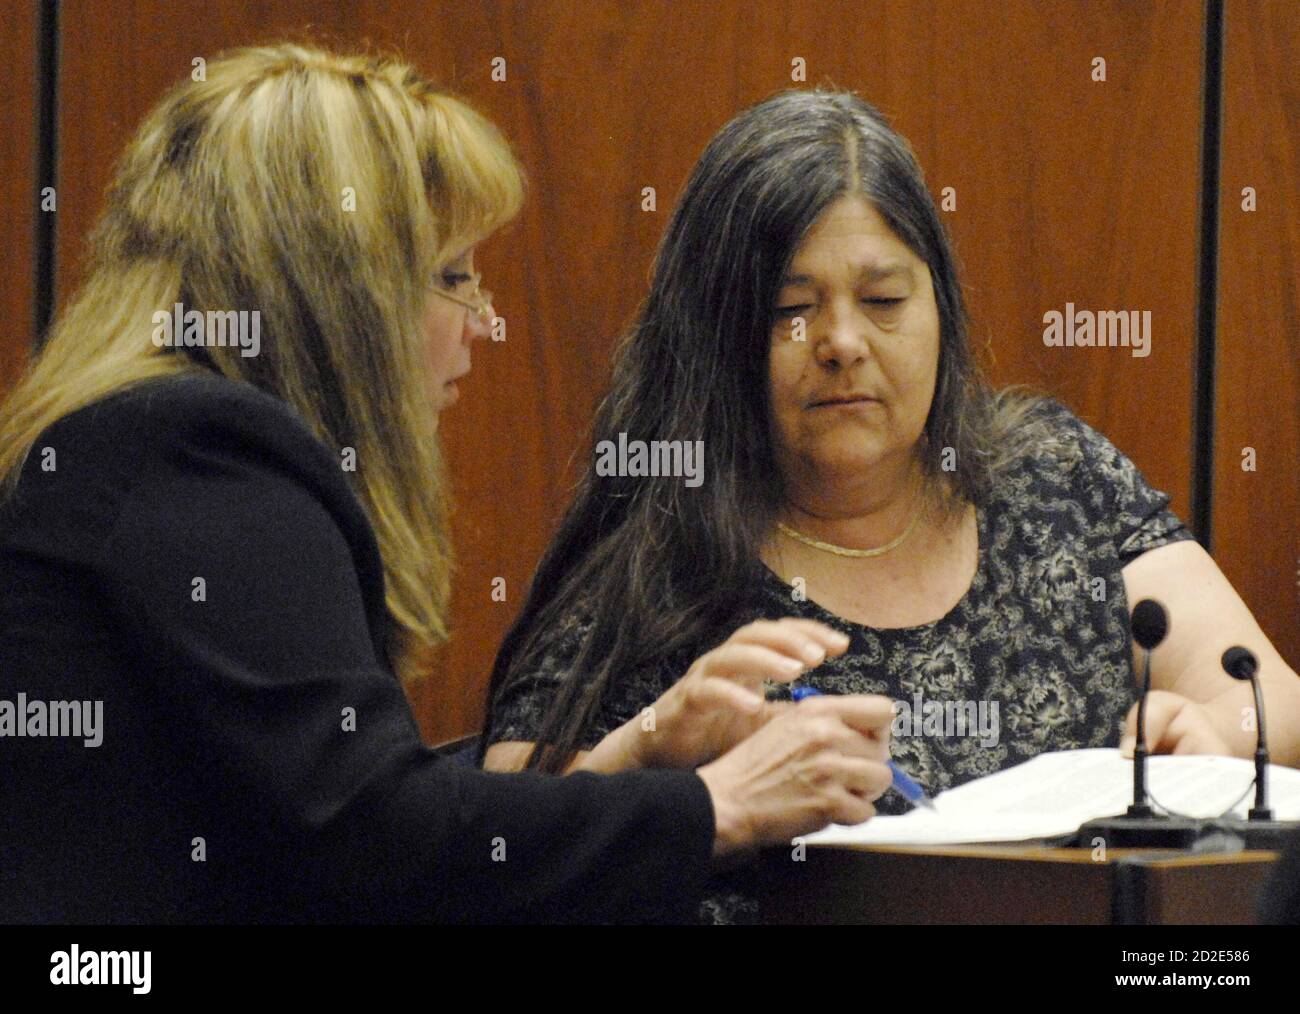 Defense Attorney Linda Kenny Baden (L) questions criminalist Doctor Lynne Herold, a witness for the prosecution, during a hearing in the murder trial of music producer Phil Spector at Los Angeles Superior Court in Los Angeles, California May 8 2007. Spector, accused of killing actress Lana Clarkson in 2003, and the jury were not in court for the hearing.   REUTERS/Jamie Rector/Pool   (UNITED STATES) Stock Photo